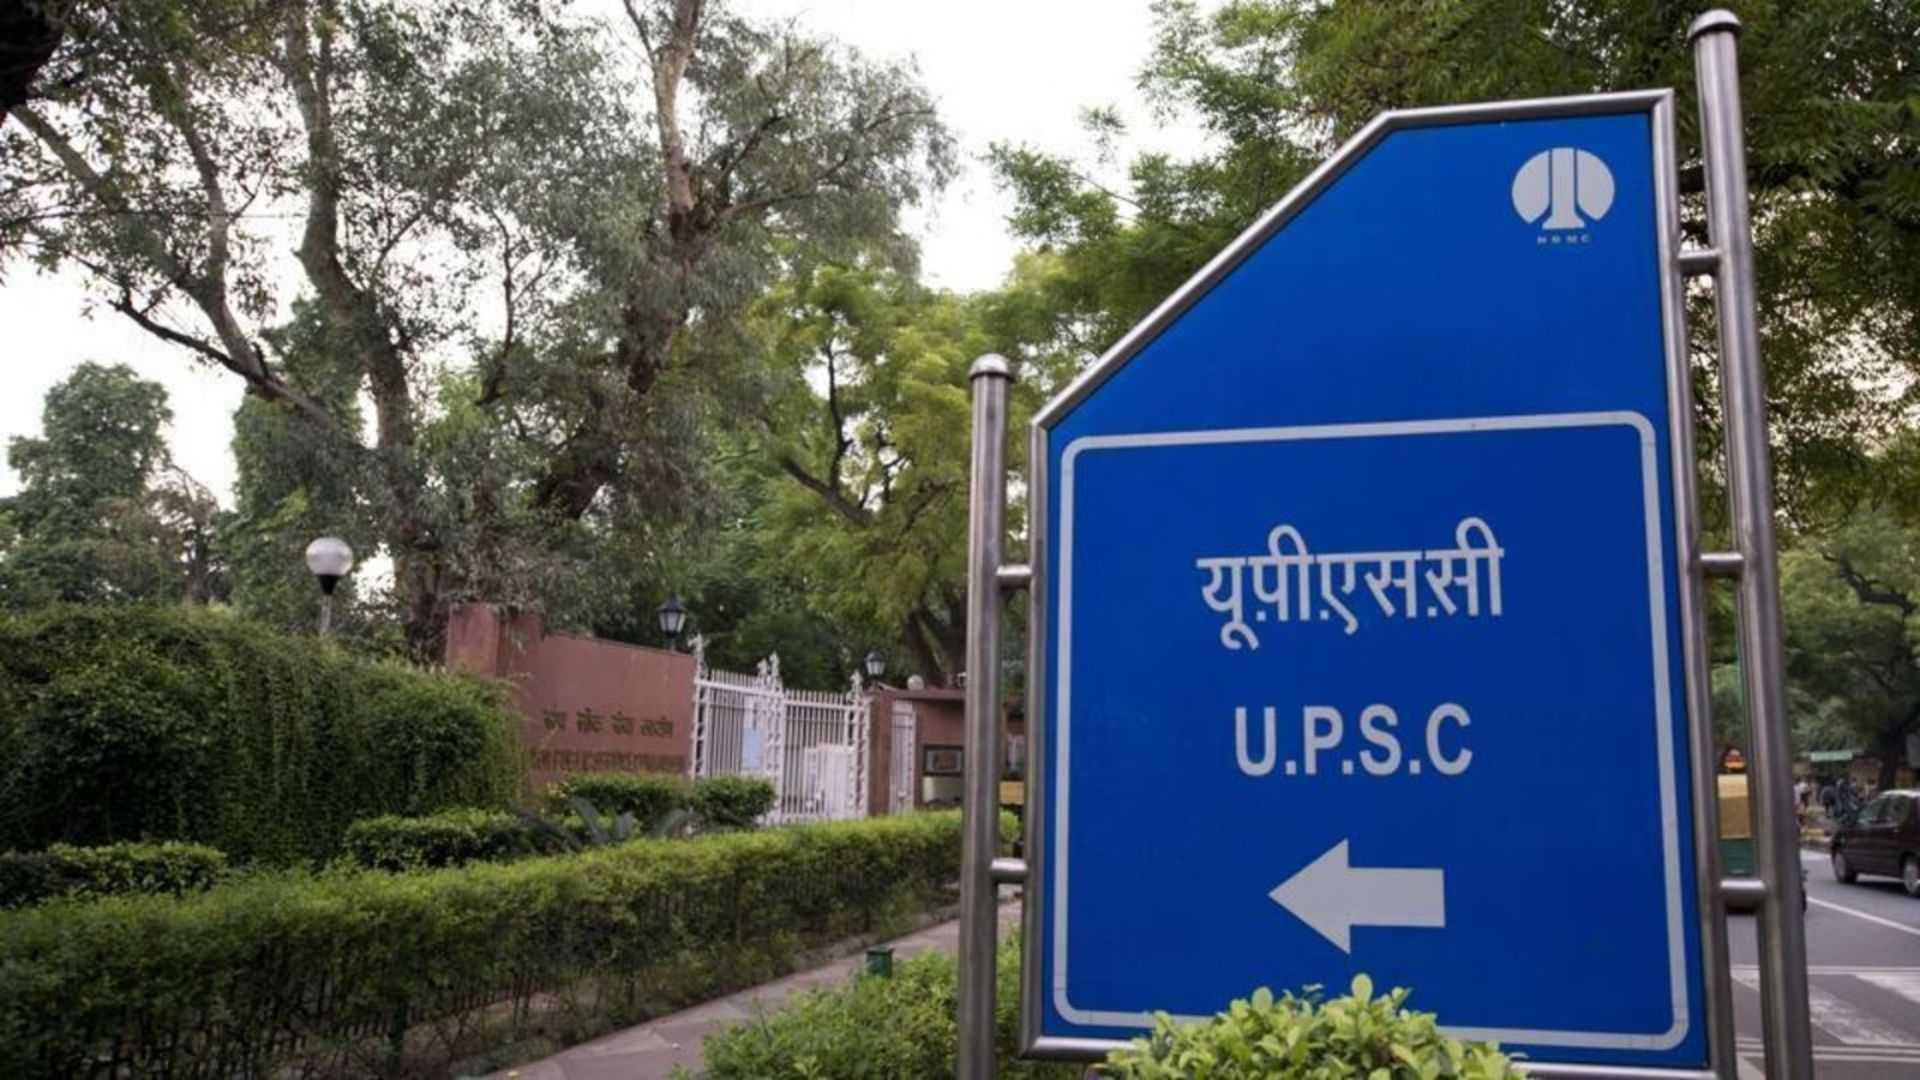 UPSC To Revamp Exam System With New Tech After Pooja Khedkar ‘Fraud’ Case: Facial Recognition And QR Codes…